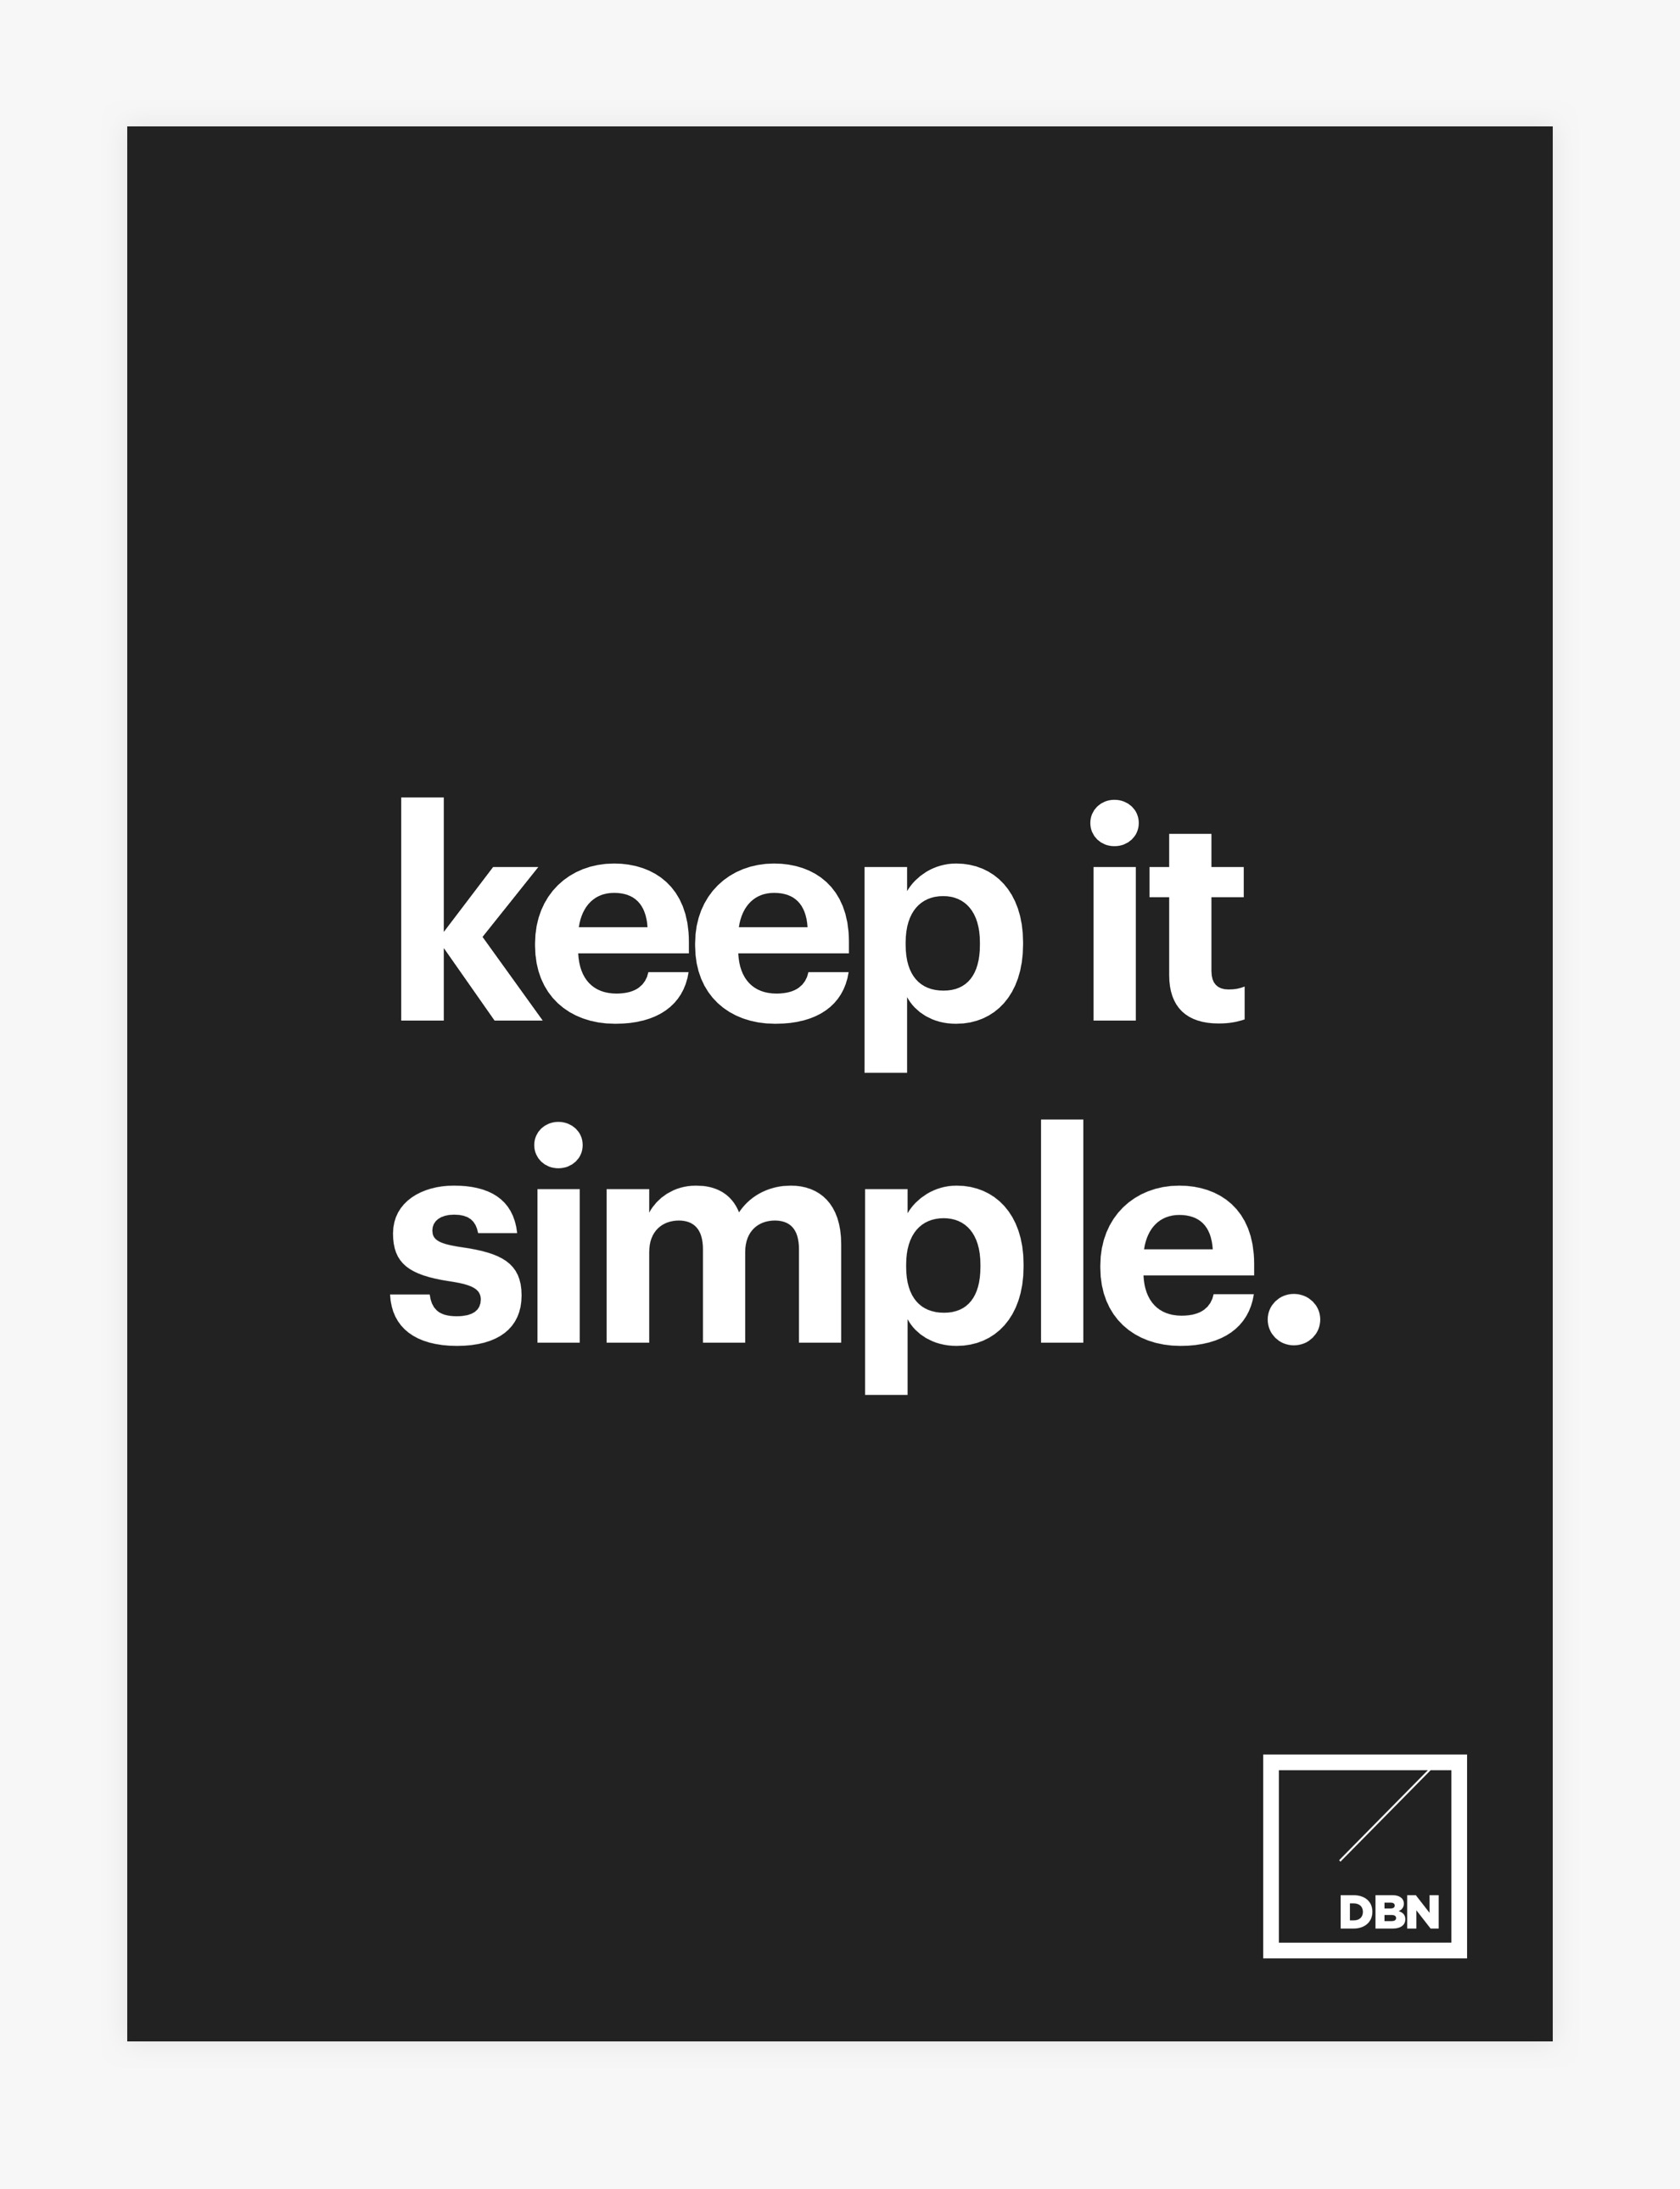 Design By Newconcept - Keep it Simple!